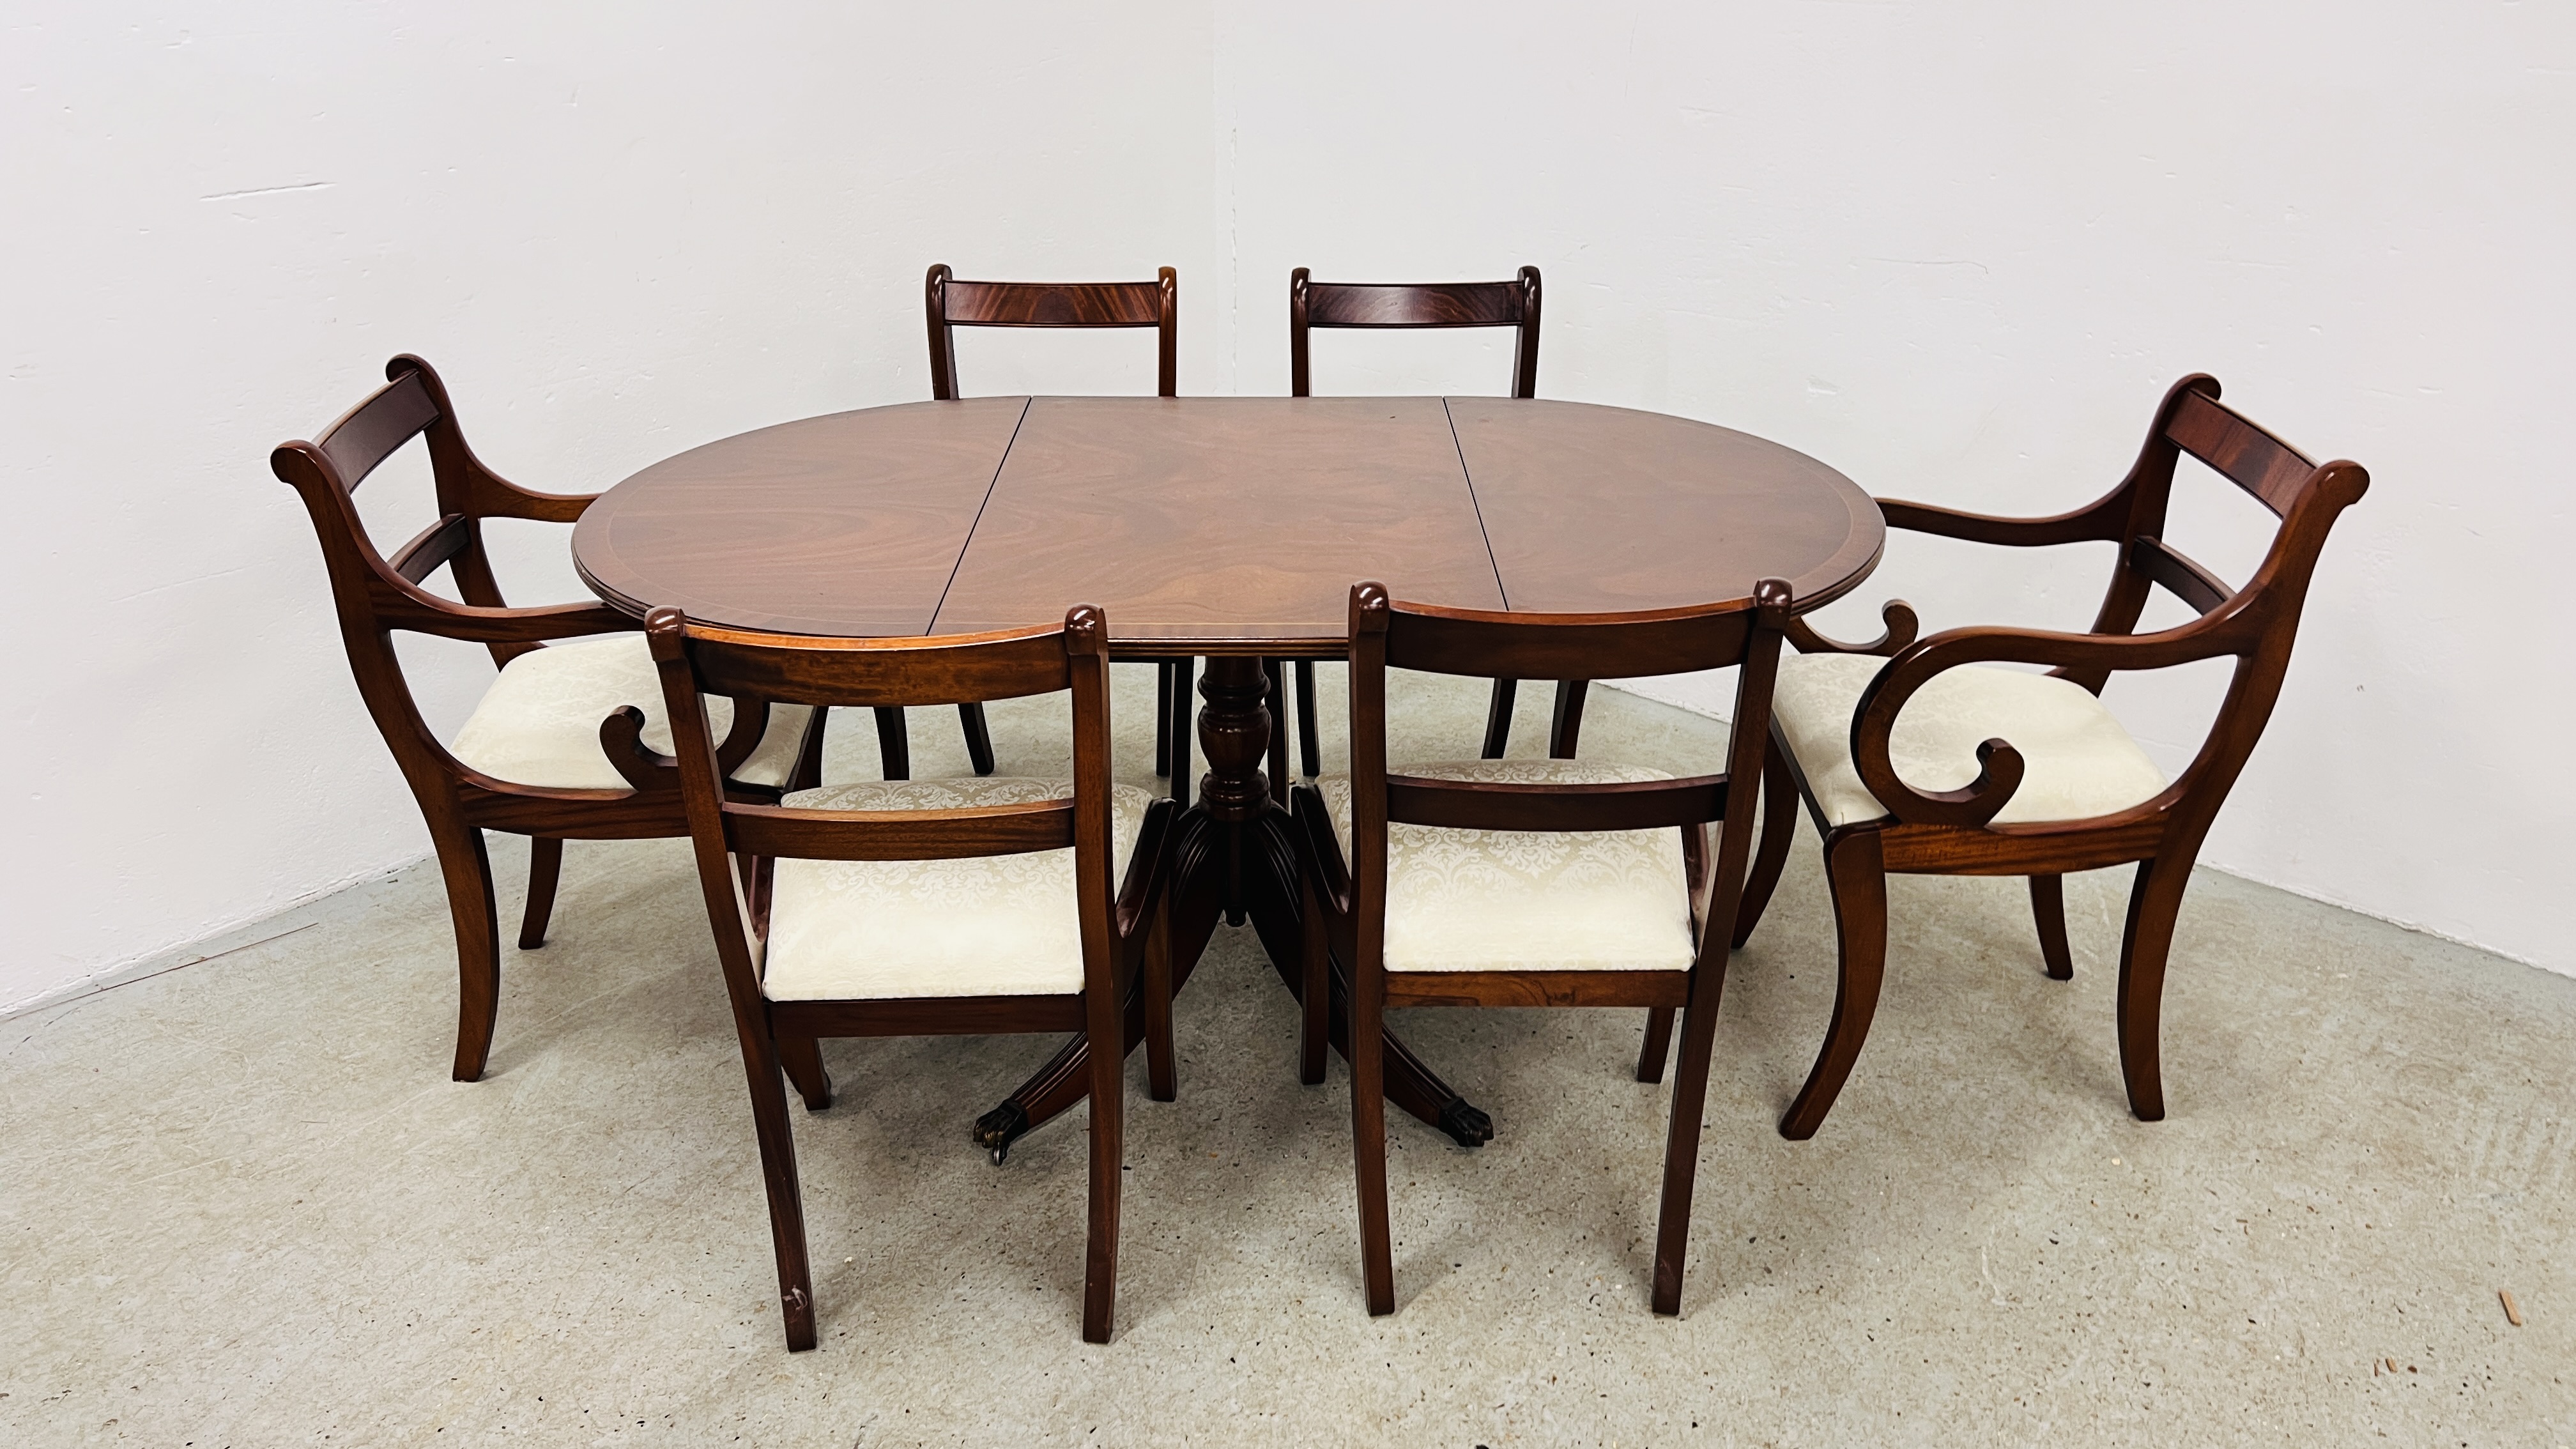 A REPRODUCTION MAHOGANY FINISH EXTENDING DROP LEAF DINING TABLE ALONG WITH 4 MATCHING CHAIRS AND 2